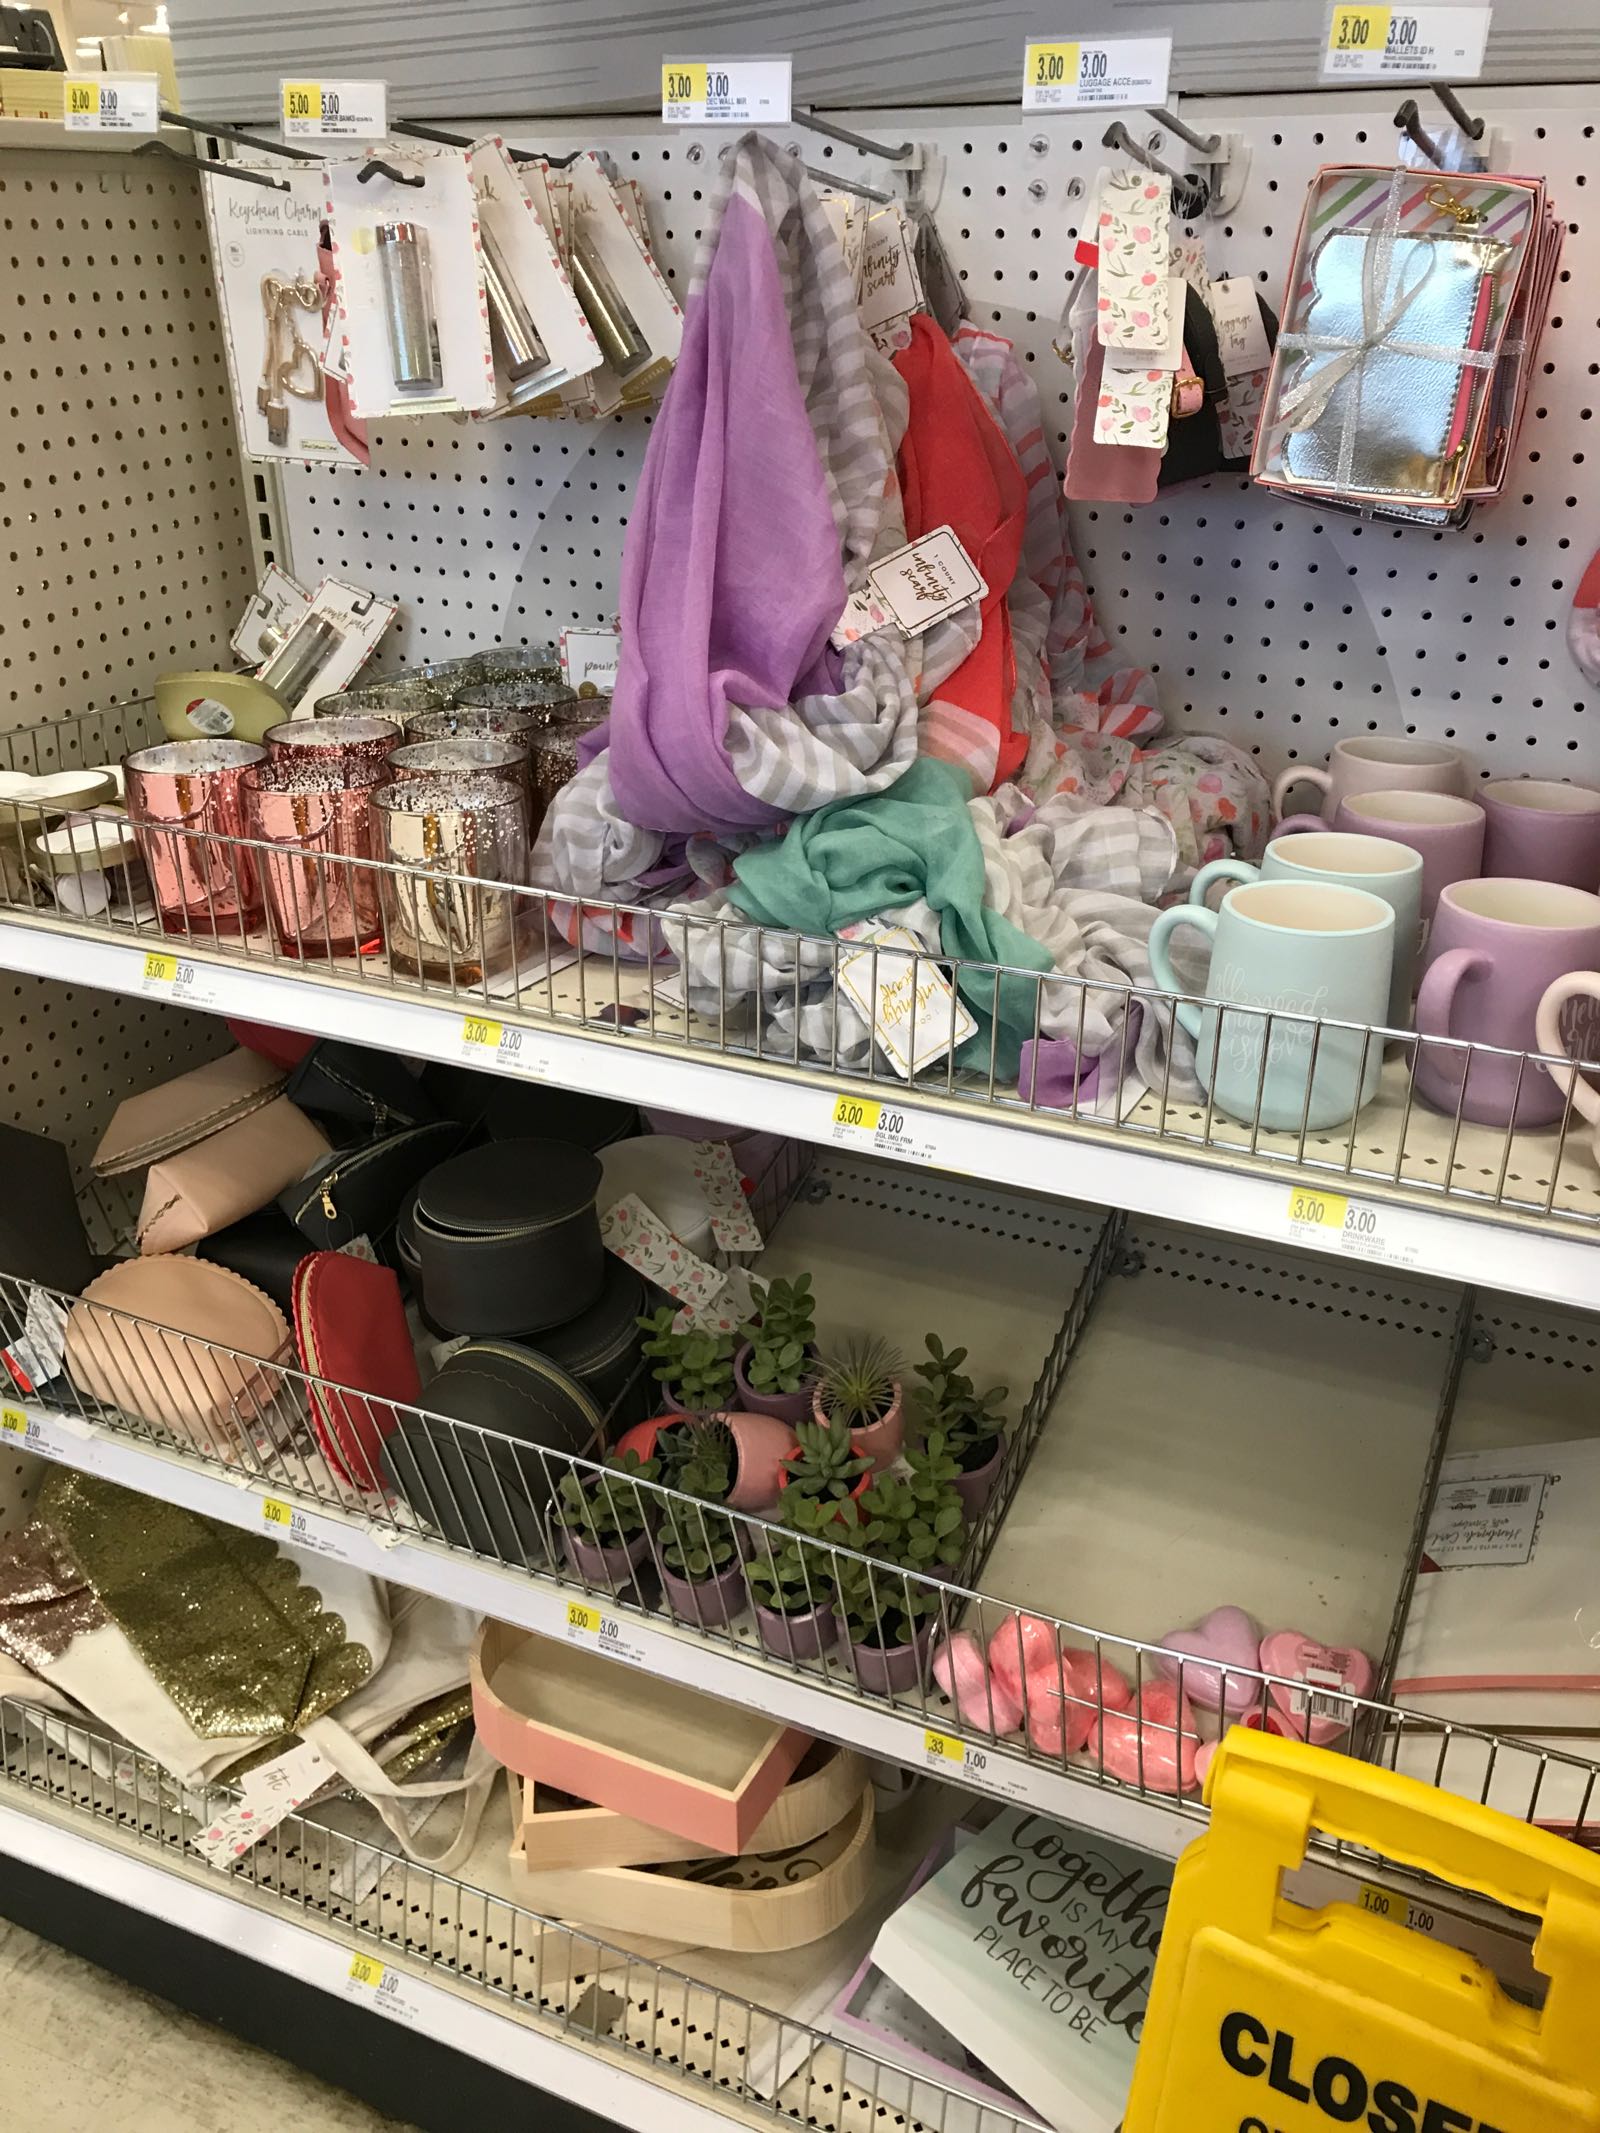 This blogger shares Target dollar post finds!